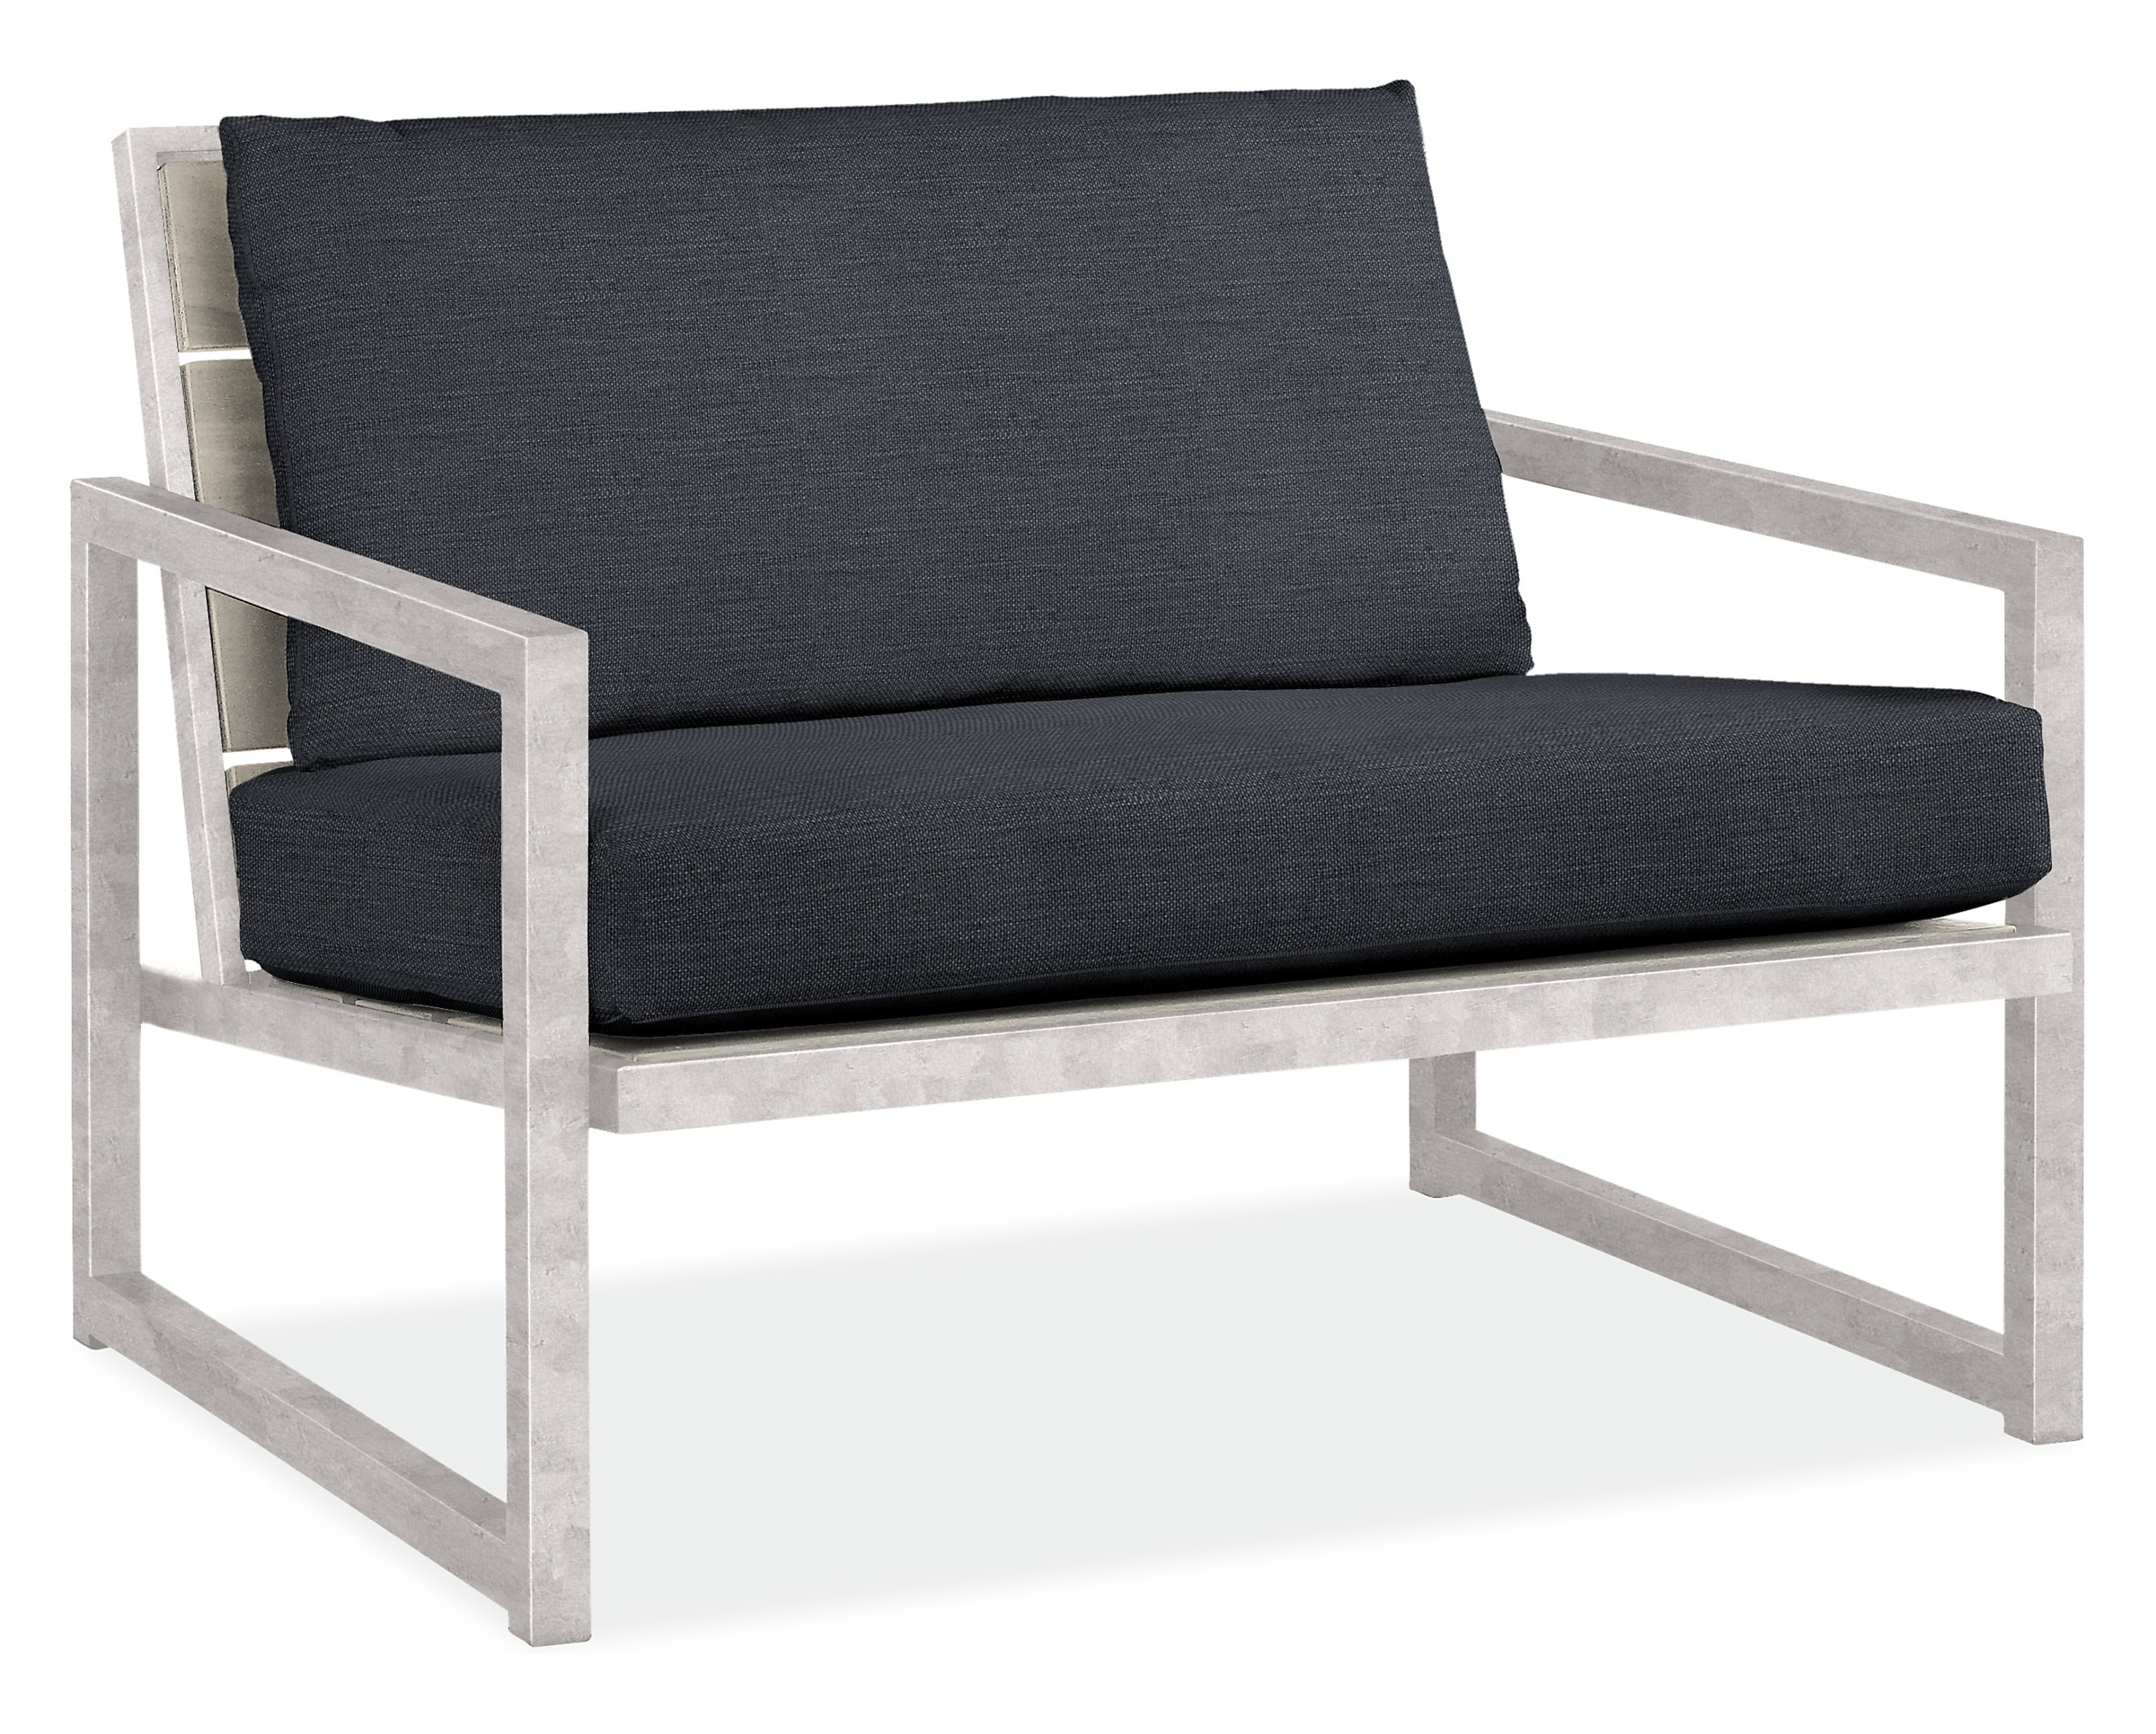 Montego 42" Lounge Chair in Thermally Modified Ash with Cushions